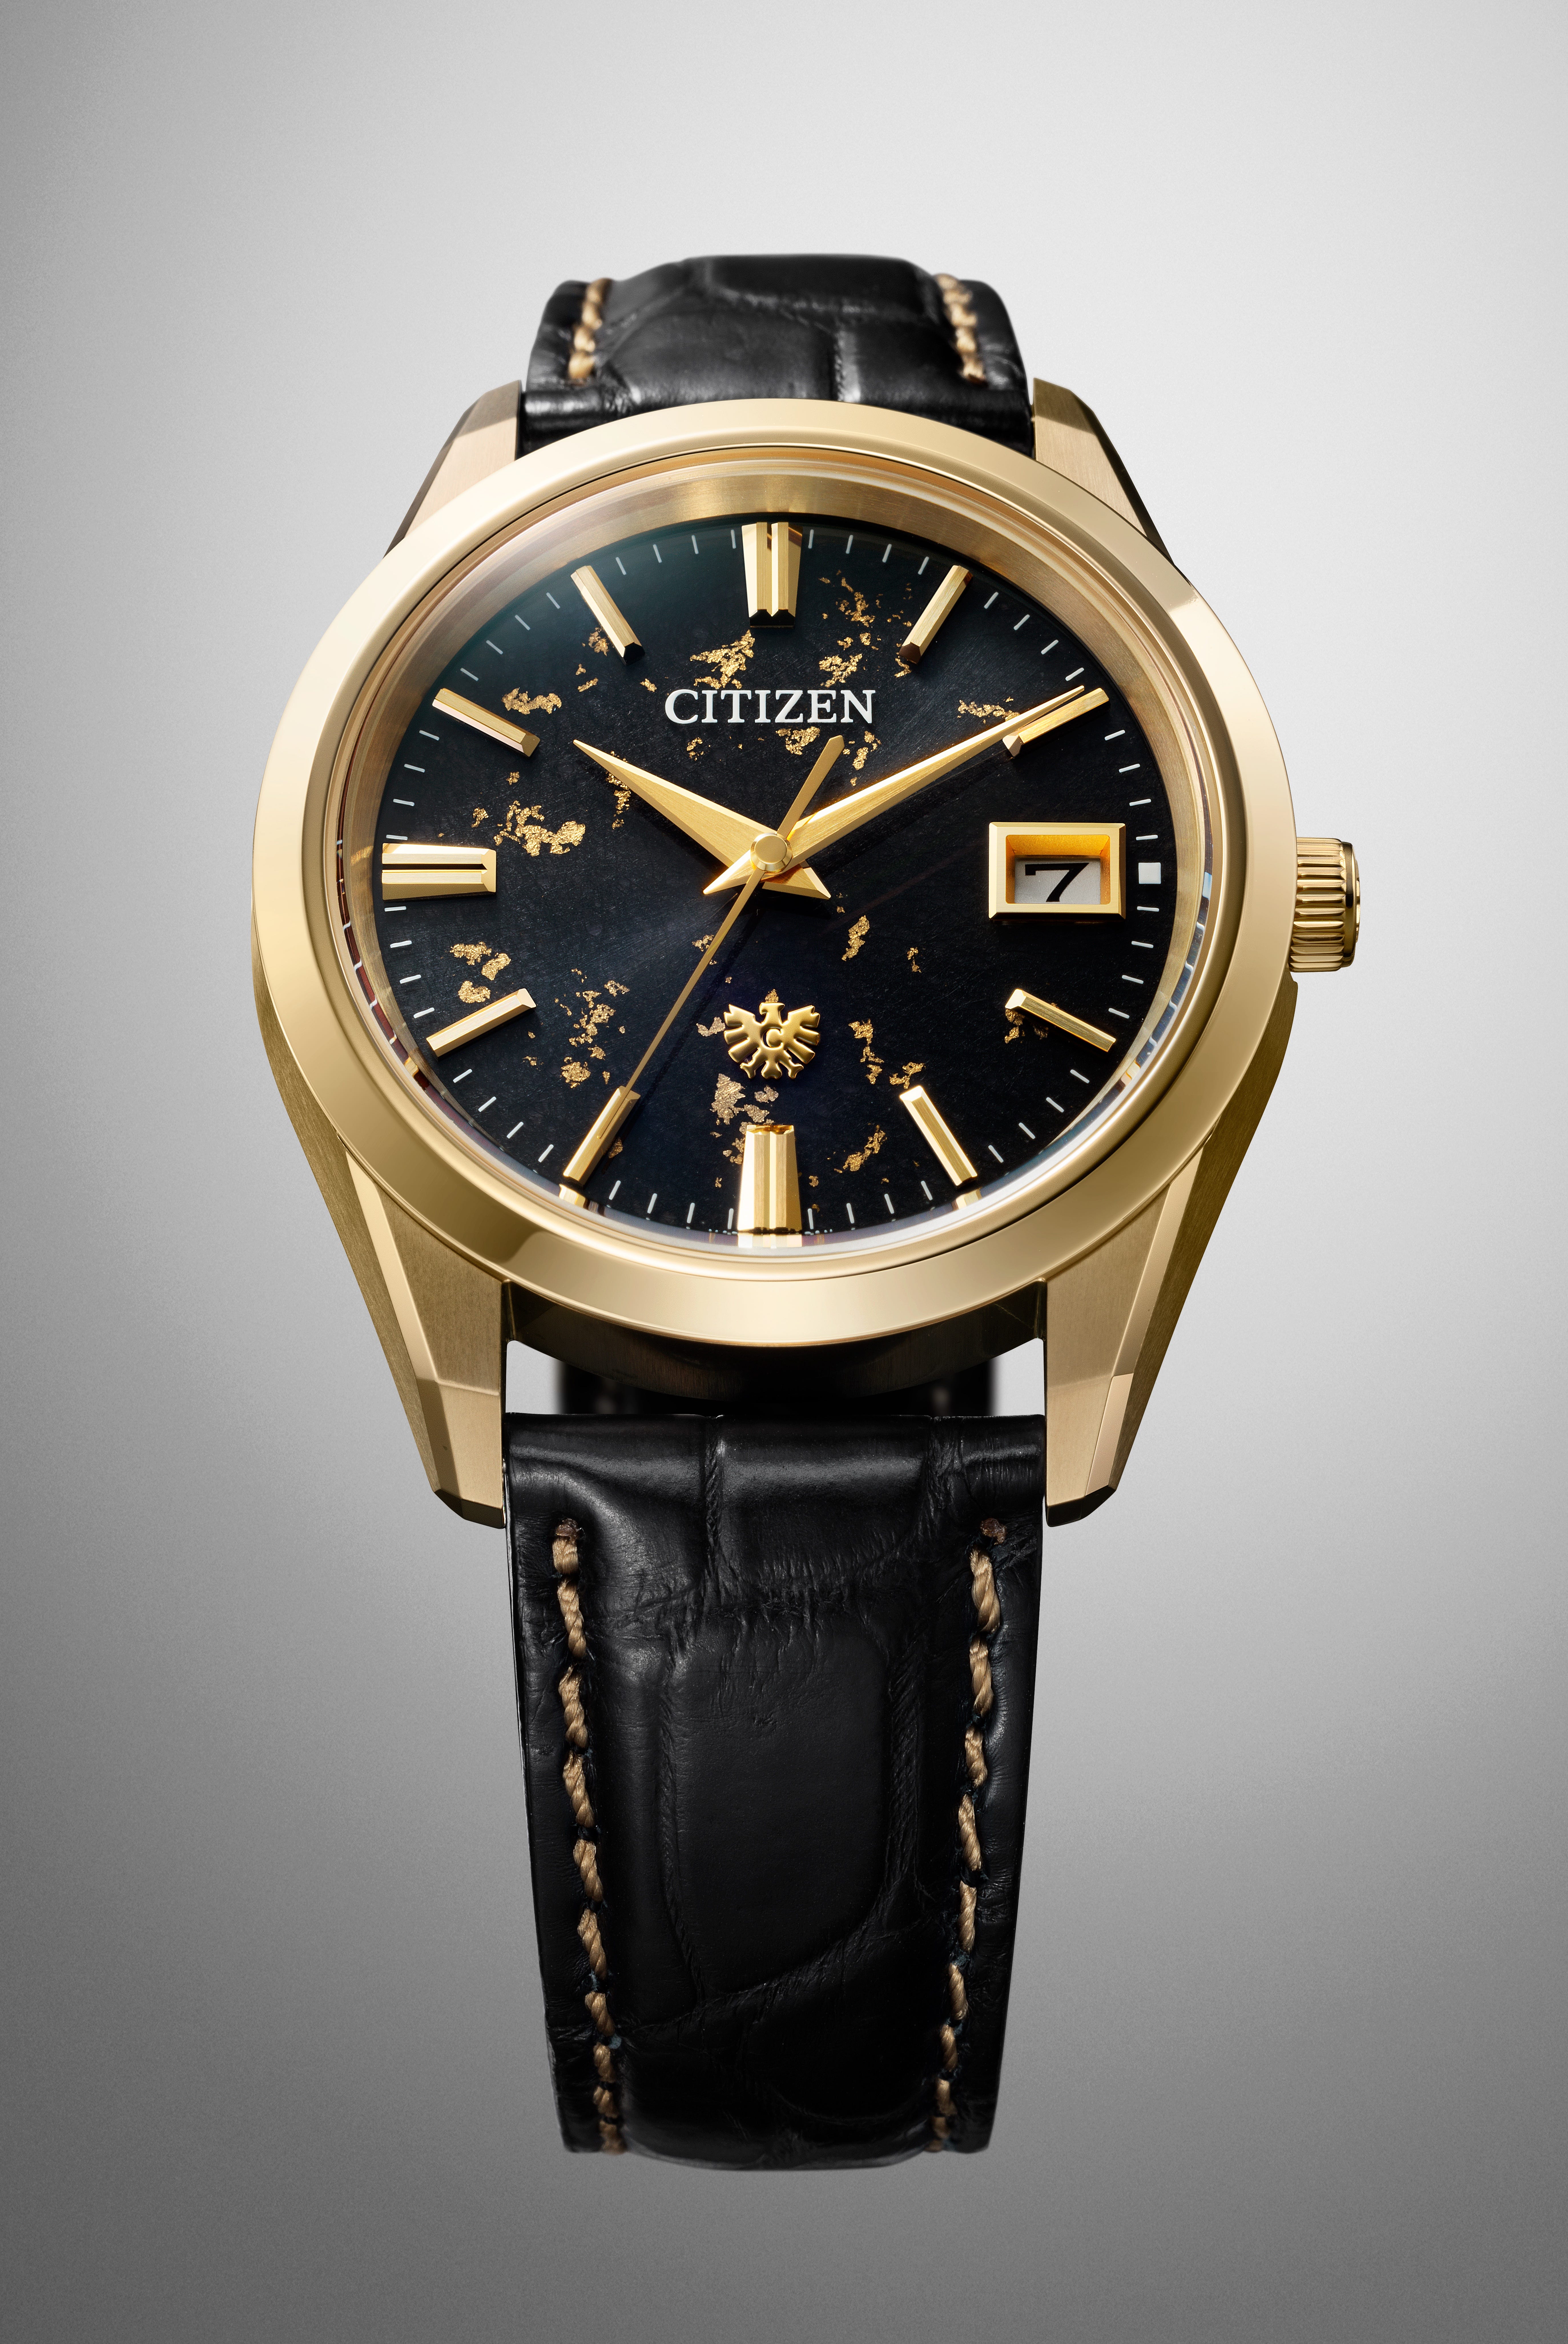 Introducing \'The Citizen\' With Washi Paper Dial